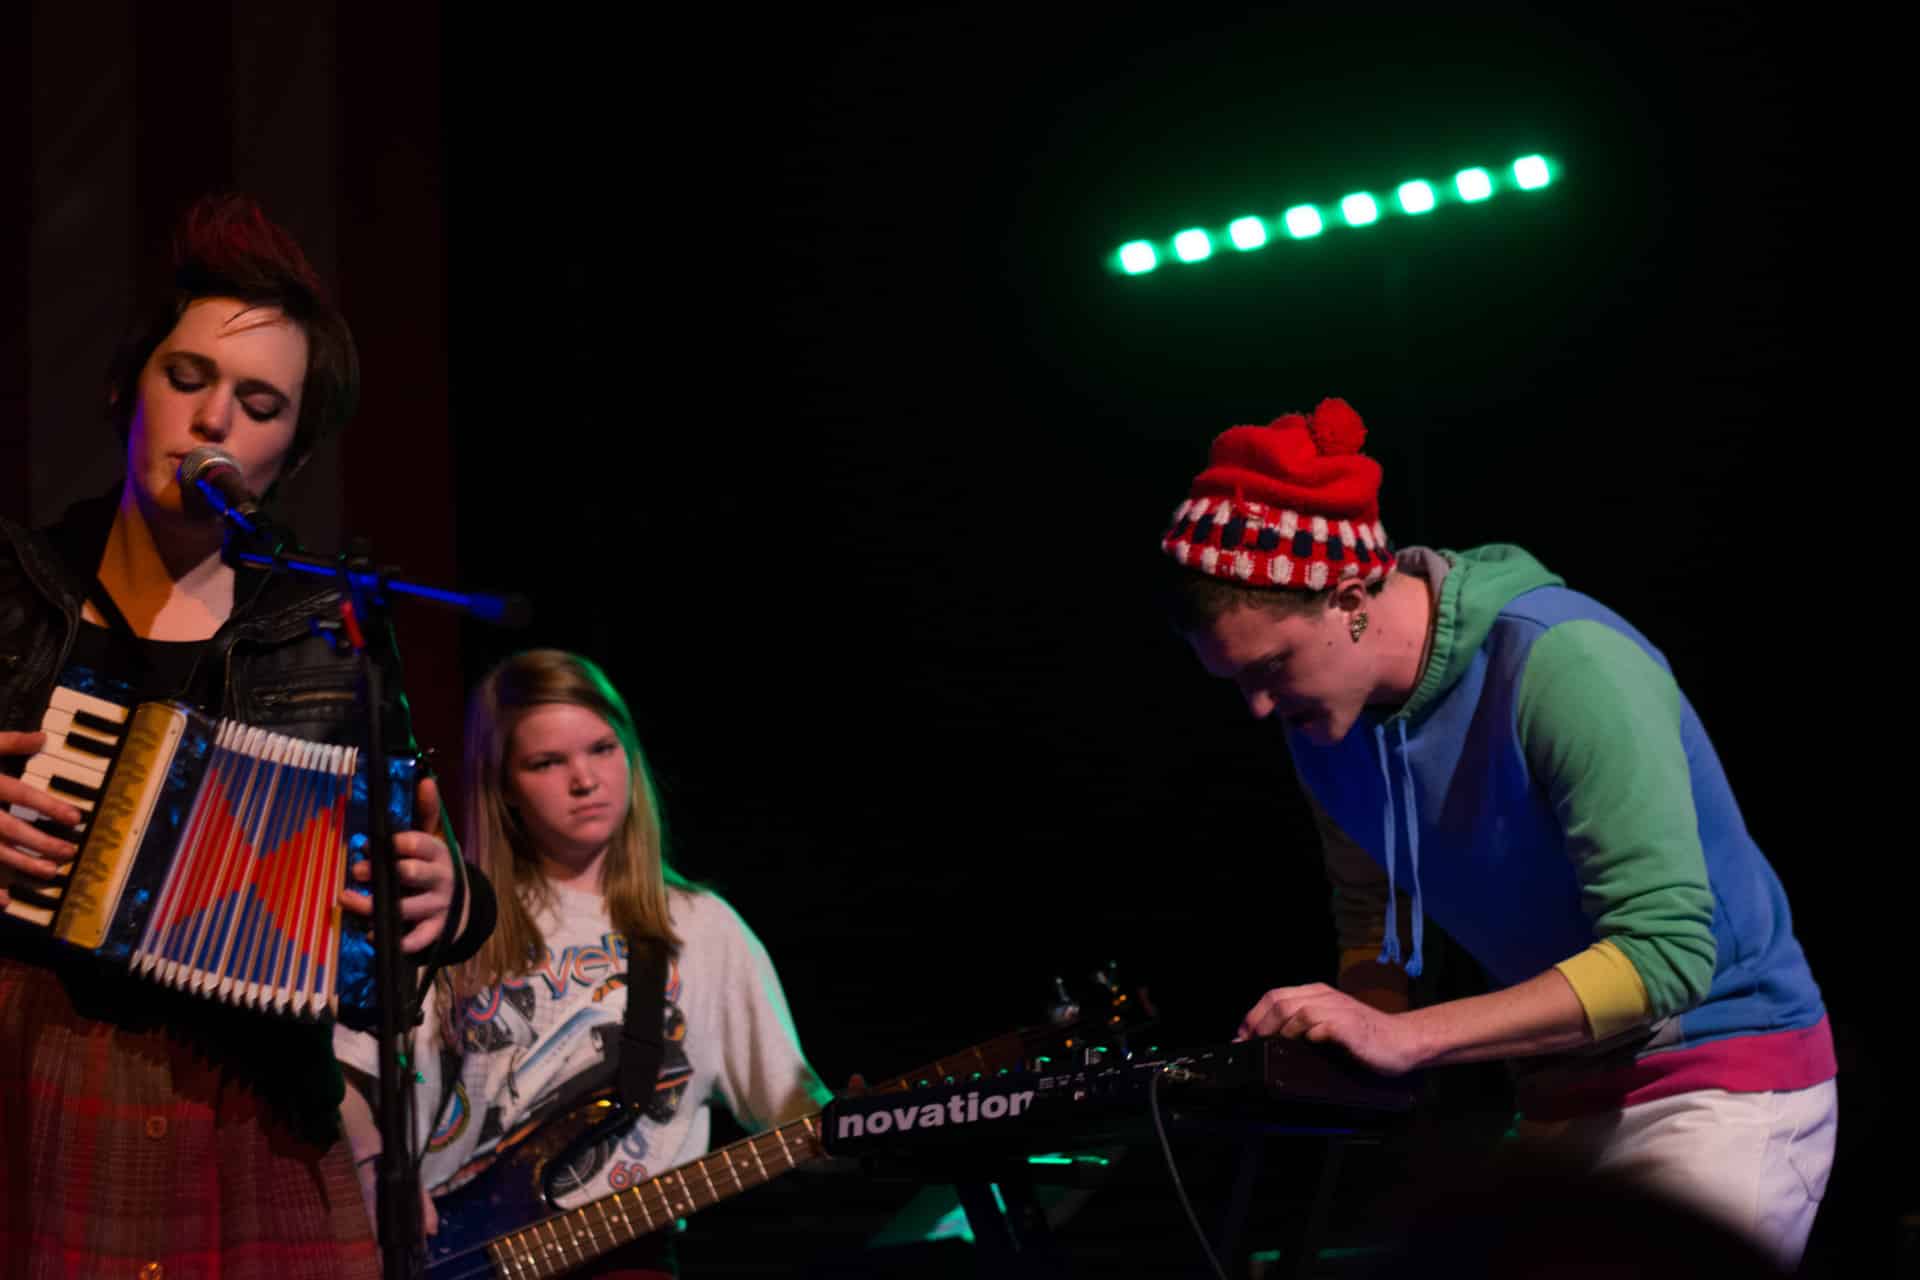 A team playing at Battle of the Bands.